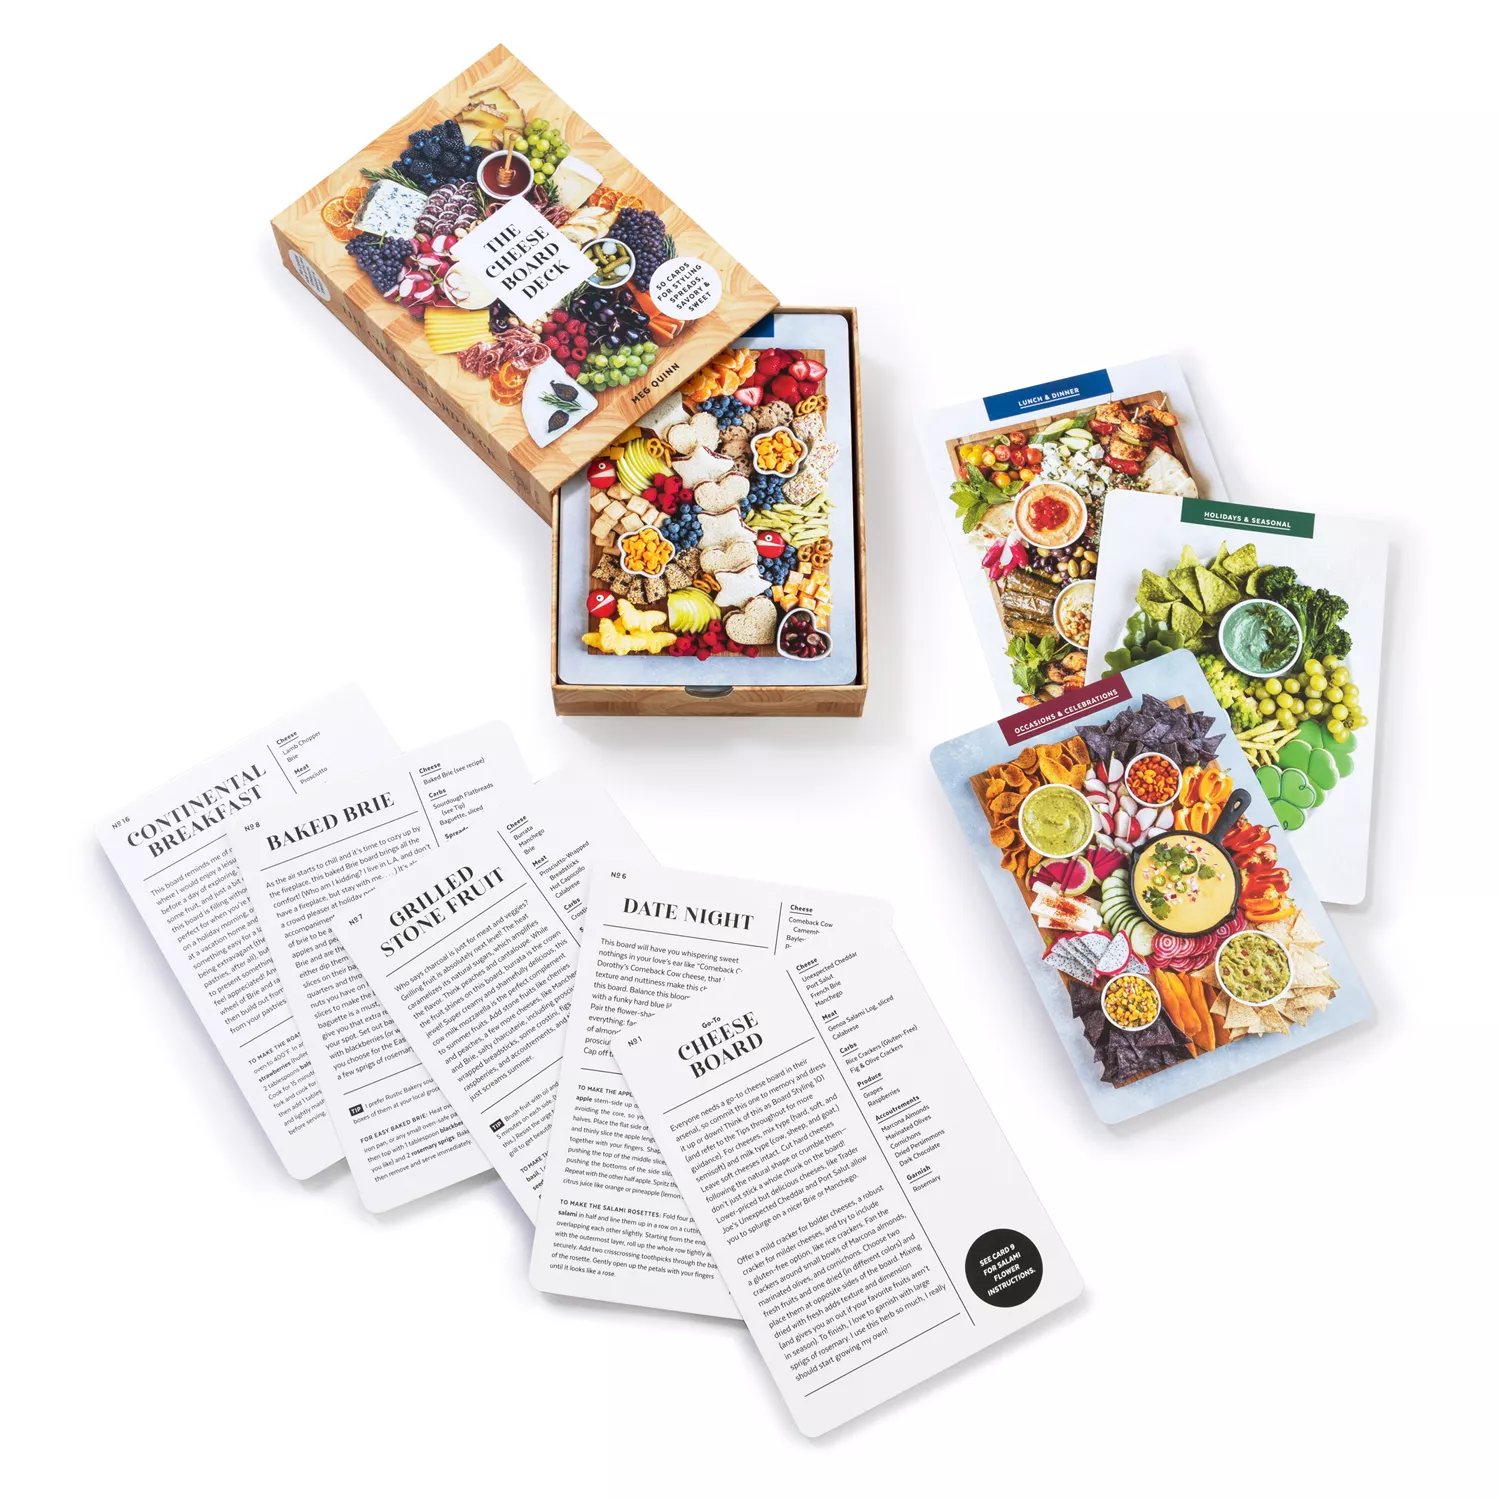 The Cheese Board Deck: 50 Cards for Styling Spreads, Savory & Sweet  